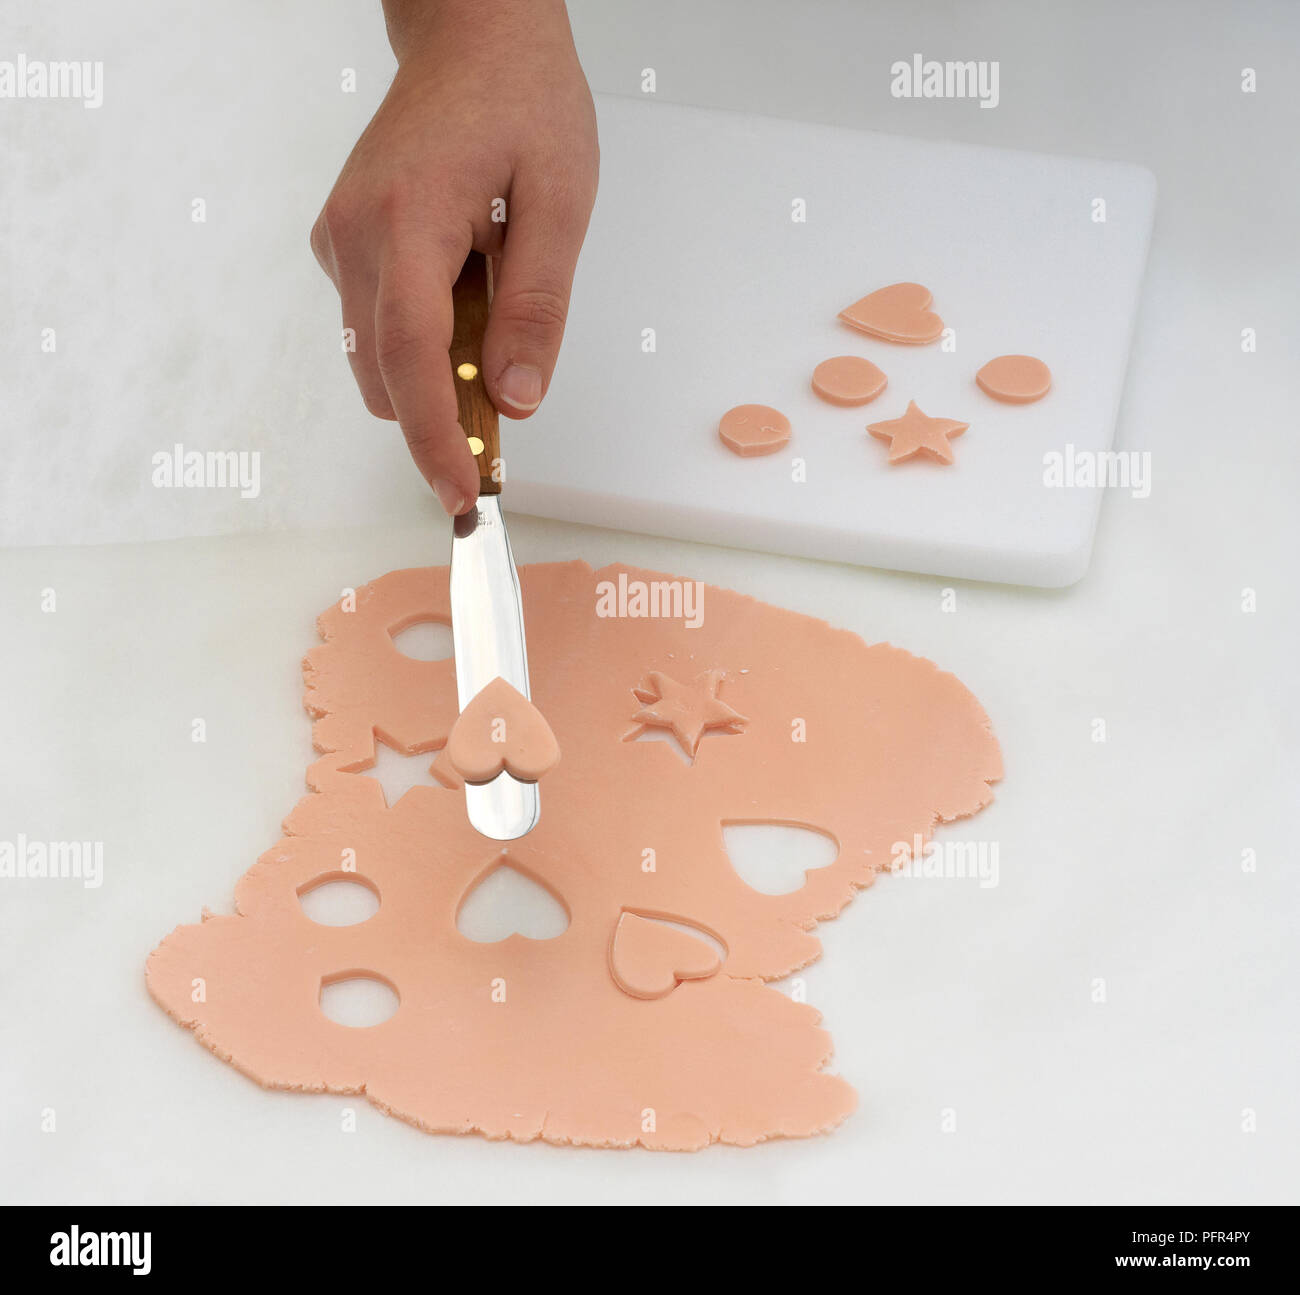 Cutting decorative shapes out of pink fondant, making cake decorations Stock Photo